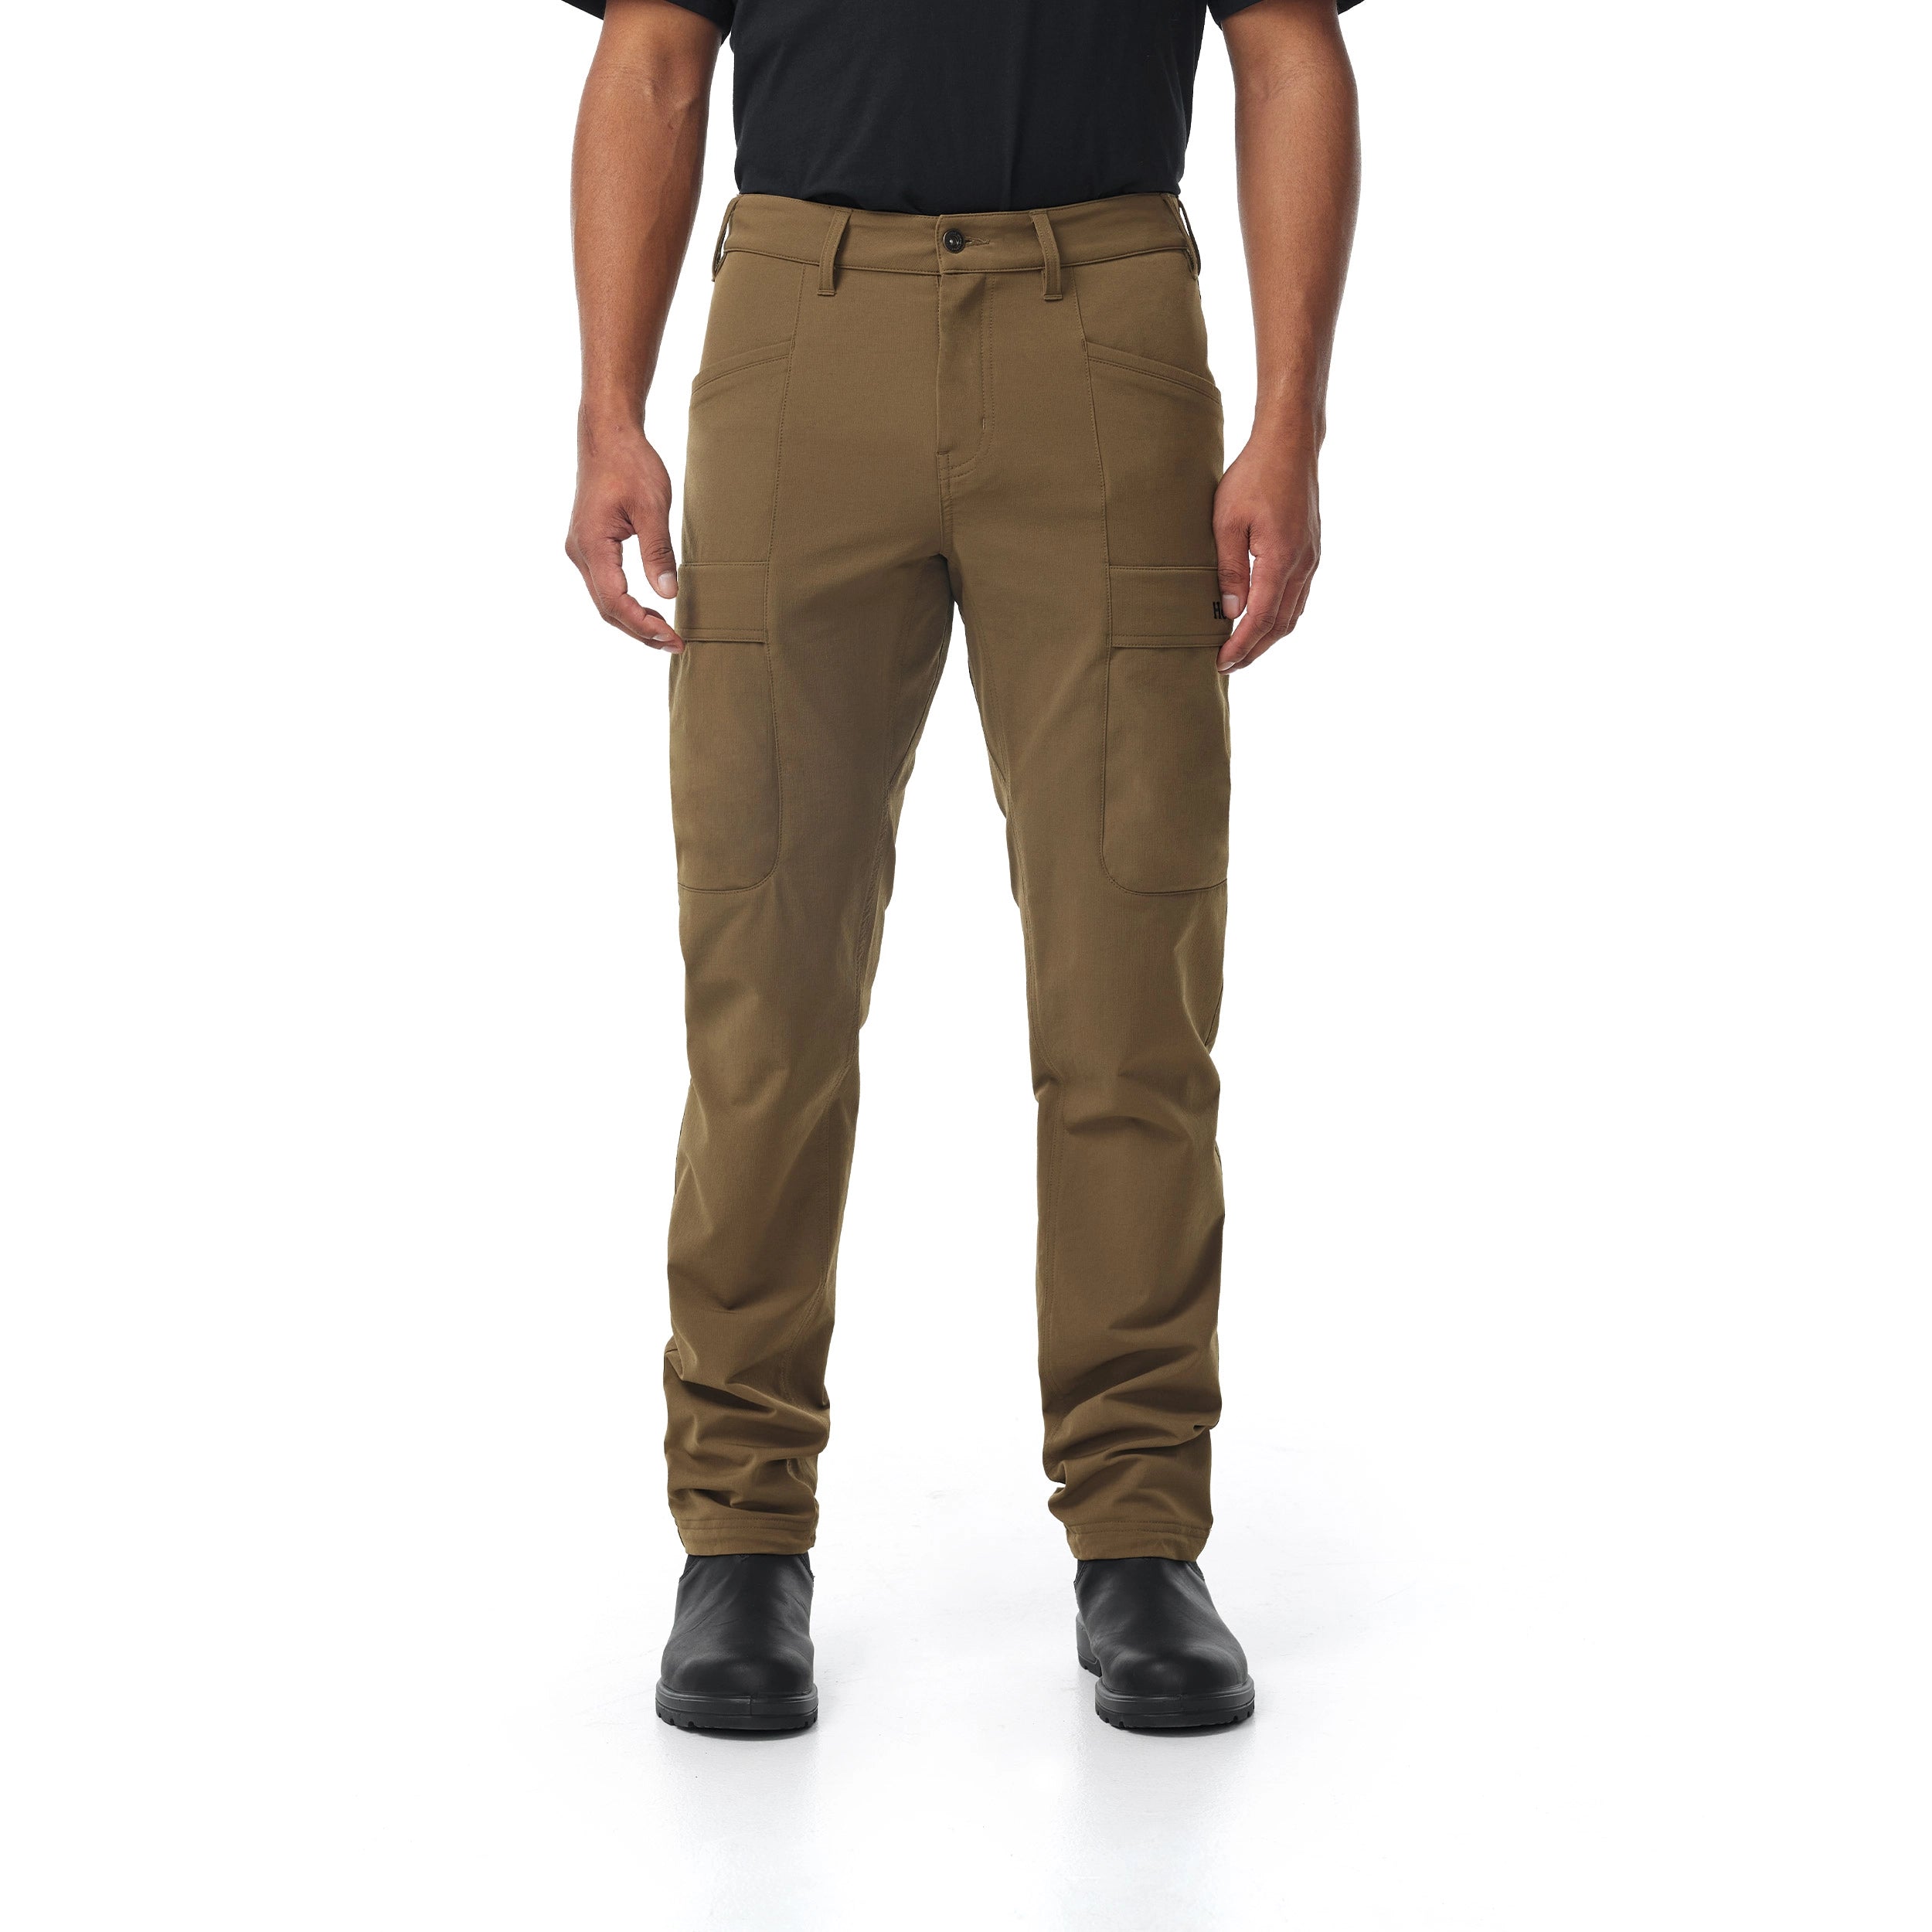 M's Expedition Pants - 32 / Coyote